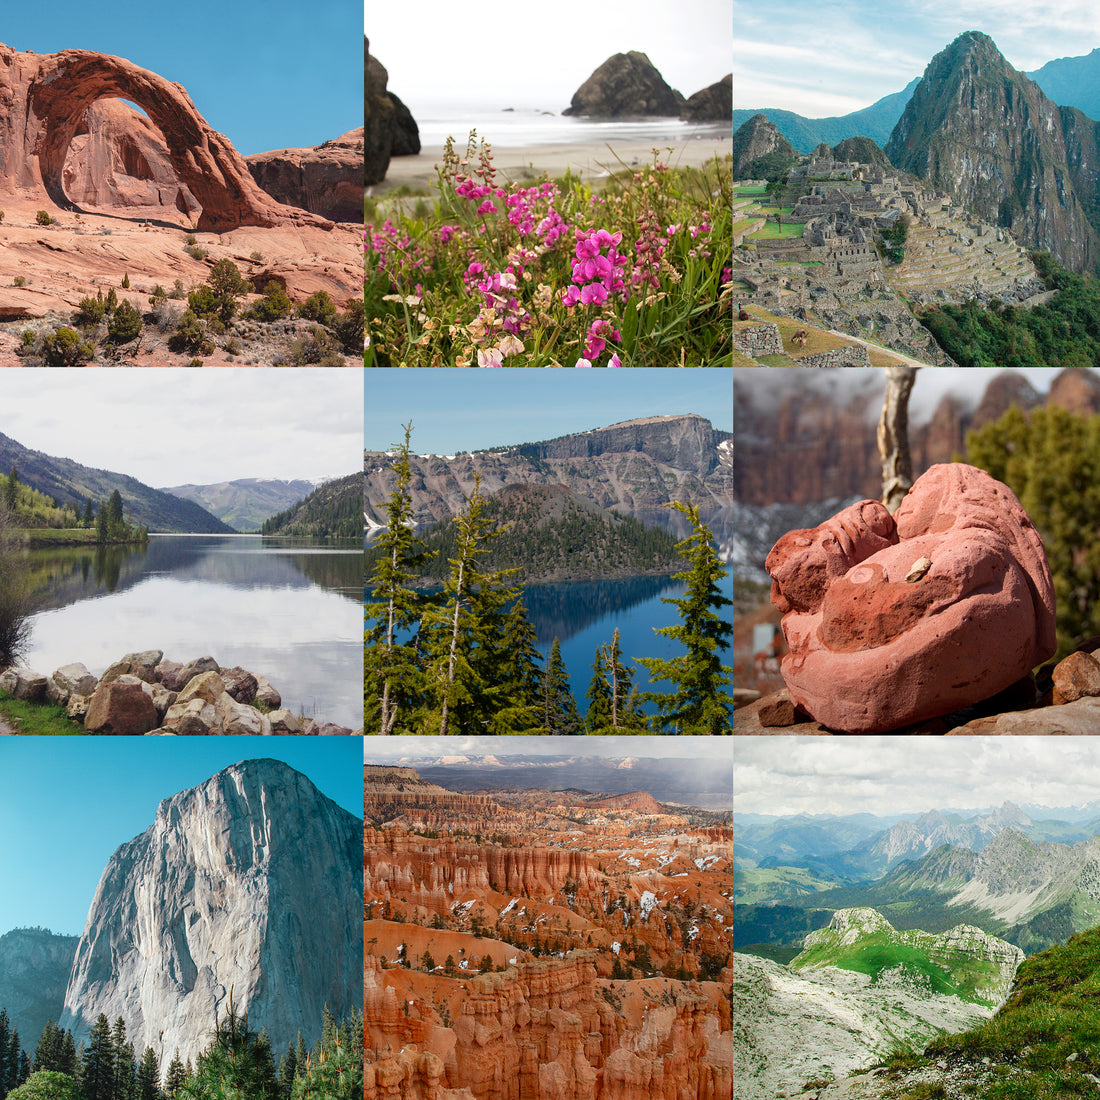 Collage of pics from traveling: Arches Nt Park, Oregon coast, Machu Picchu, Smith and Morehouse, Crater Lake, Zion, Yosemite, Bryce, the Alps